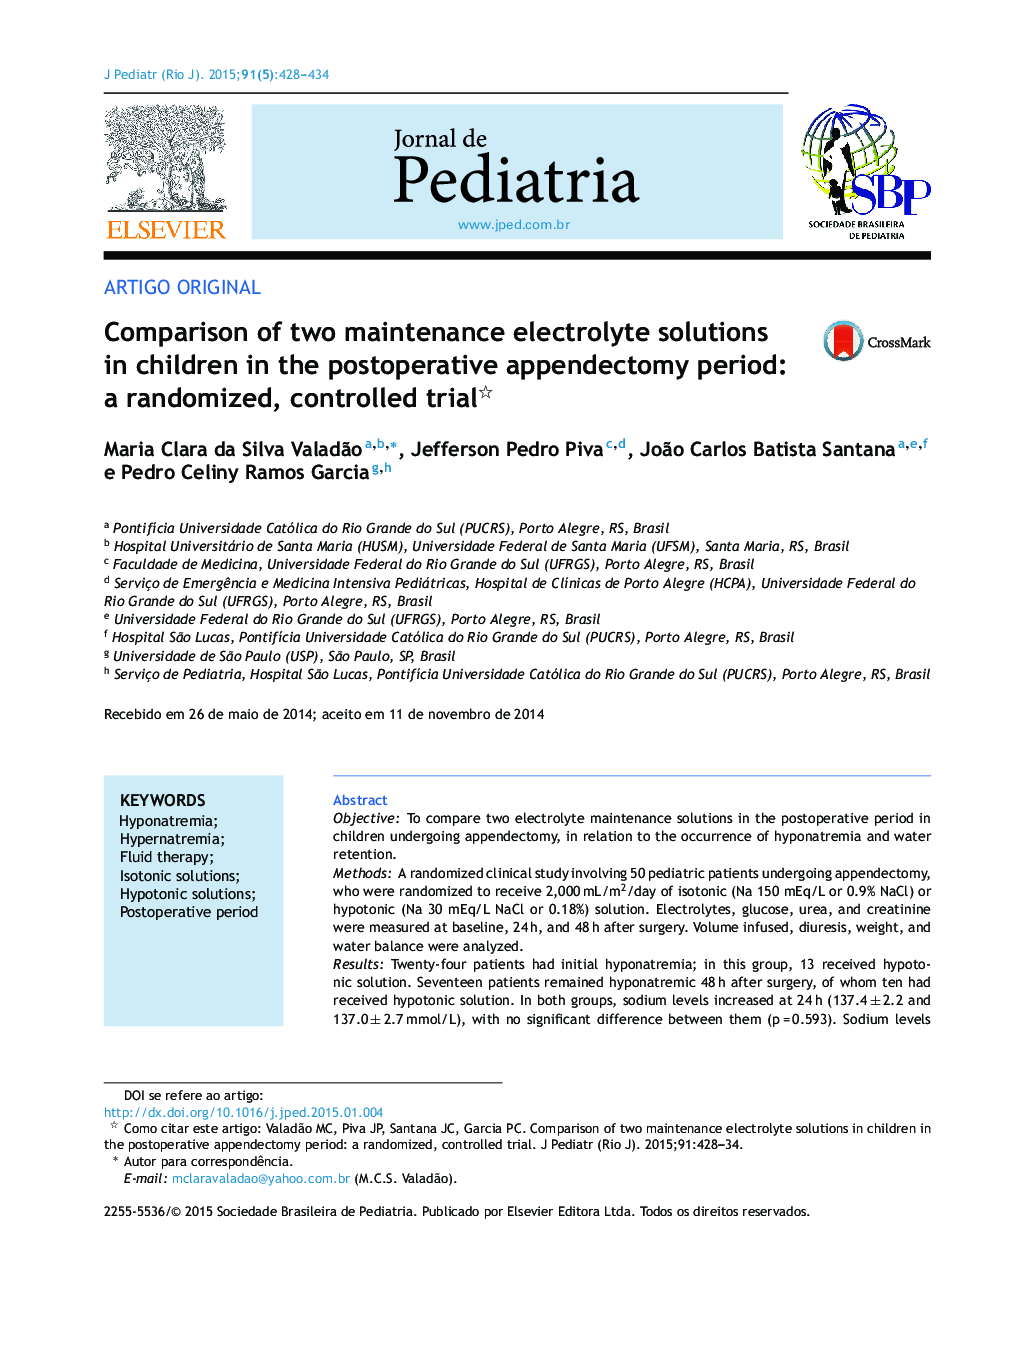 Comparison of two maintenance electrolyte solutions in children in the postoperative appendectomy period: a randomized, controlled trial 